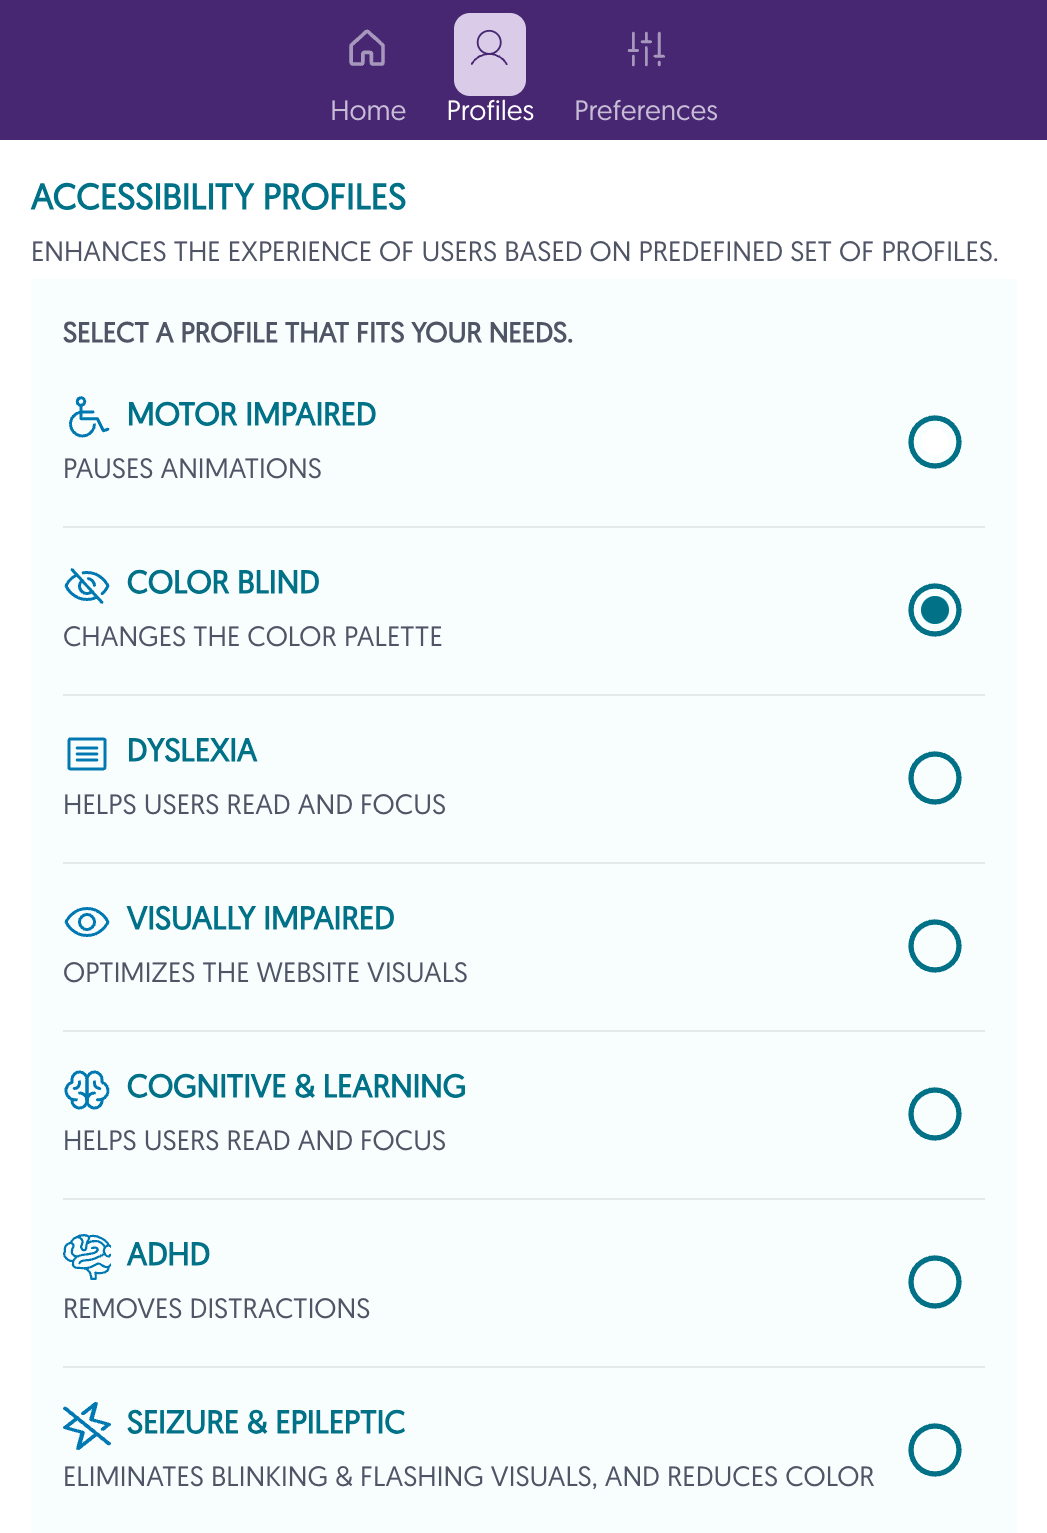 pop-up of color blind accessibility profile options.